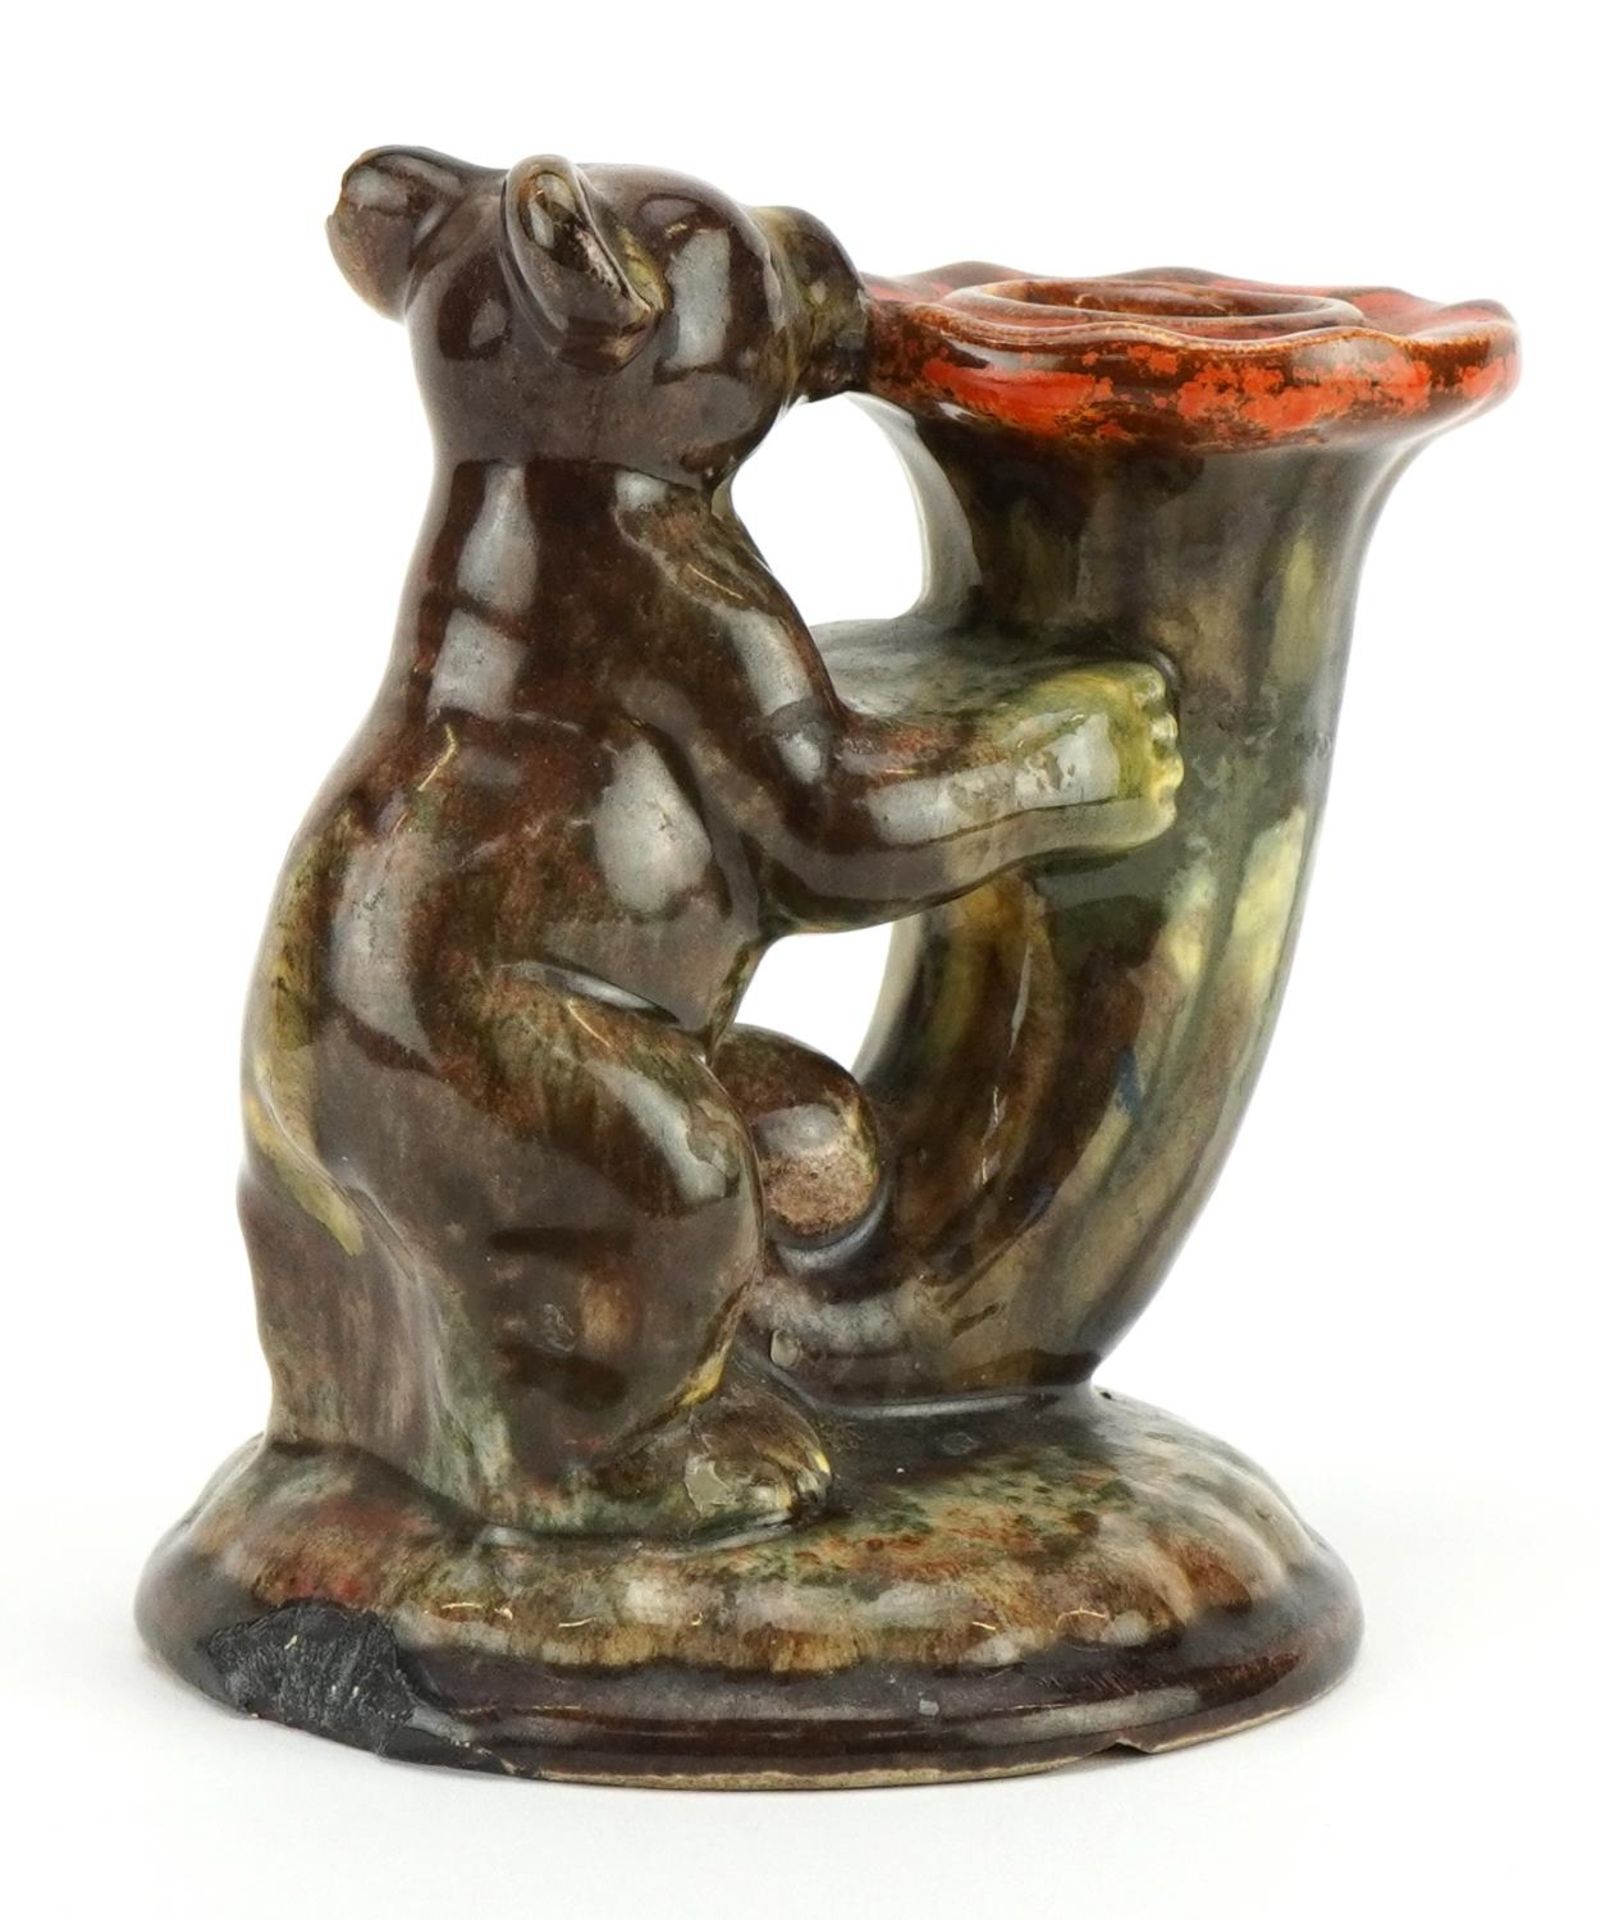 German Art Deco candlestick in the form of a bear holding a cornucopia having a mottled glaze, - Image 2 of 3